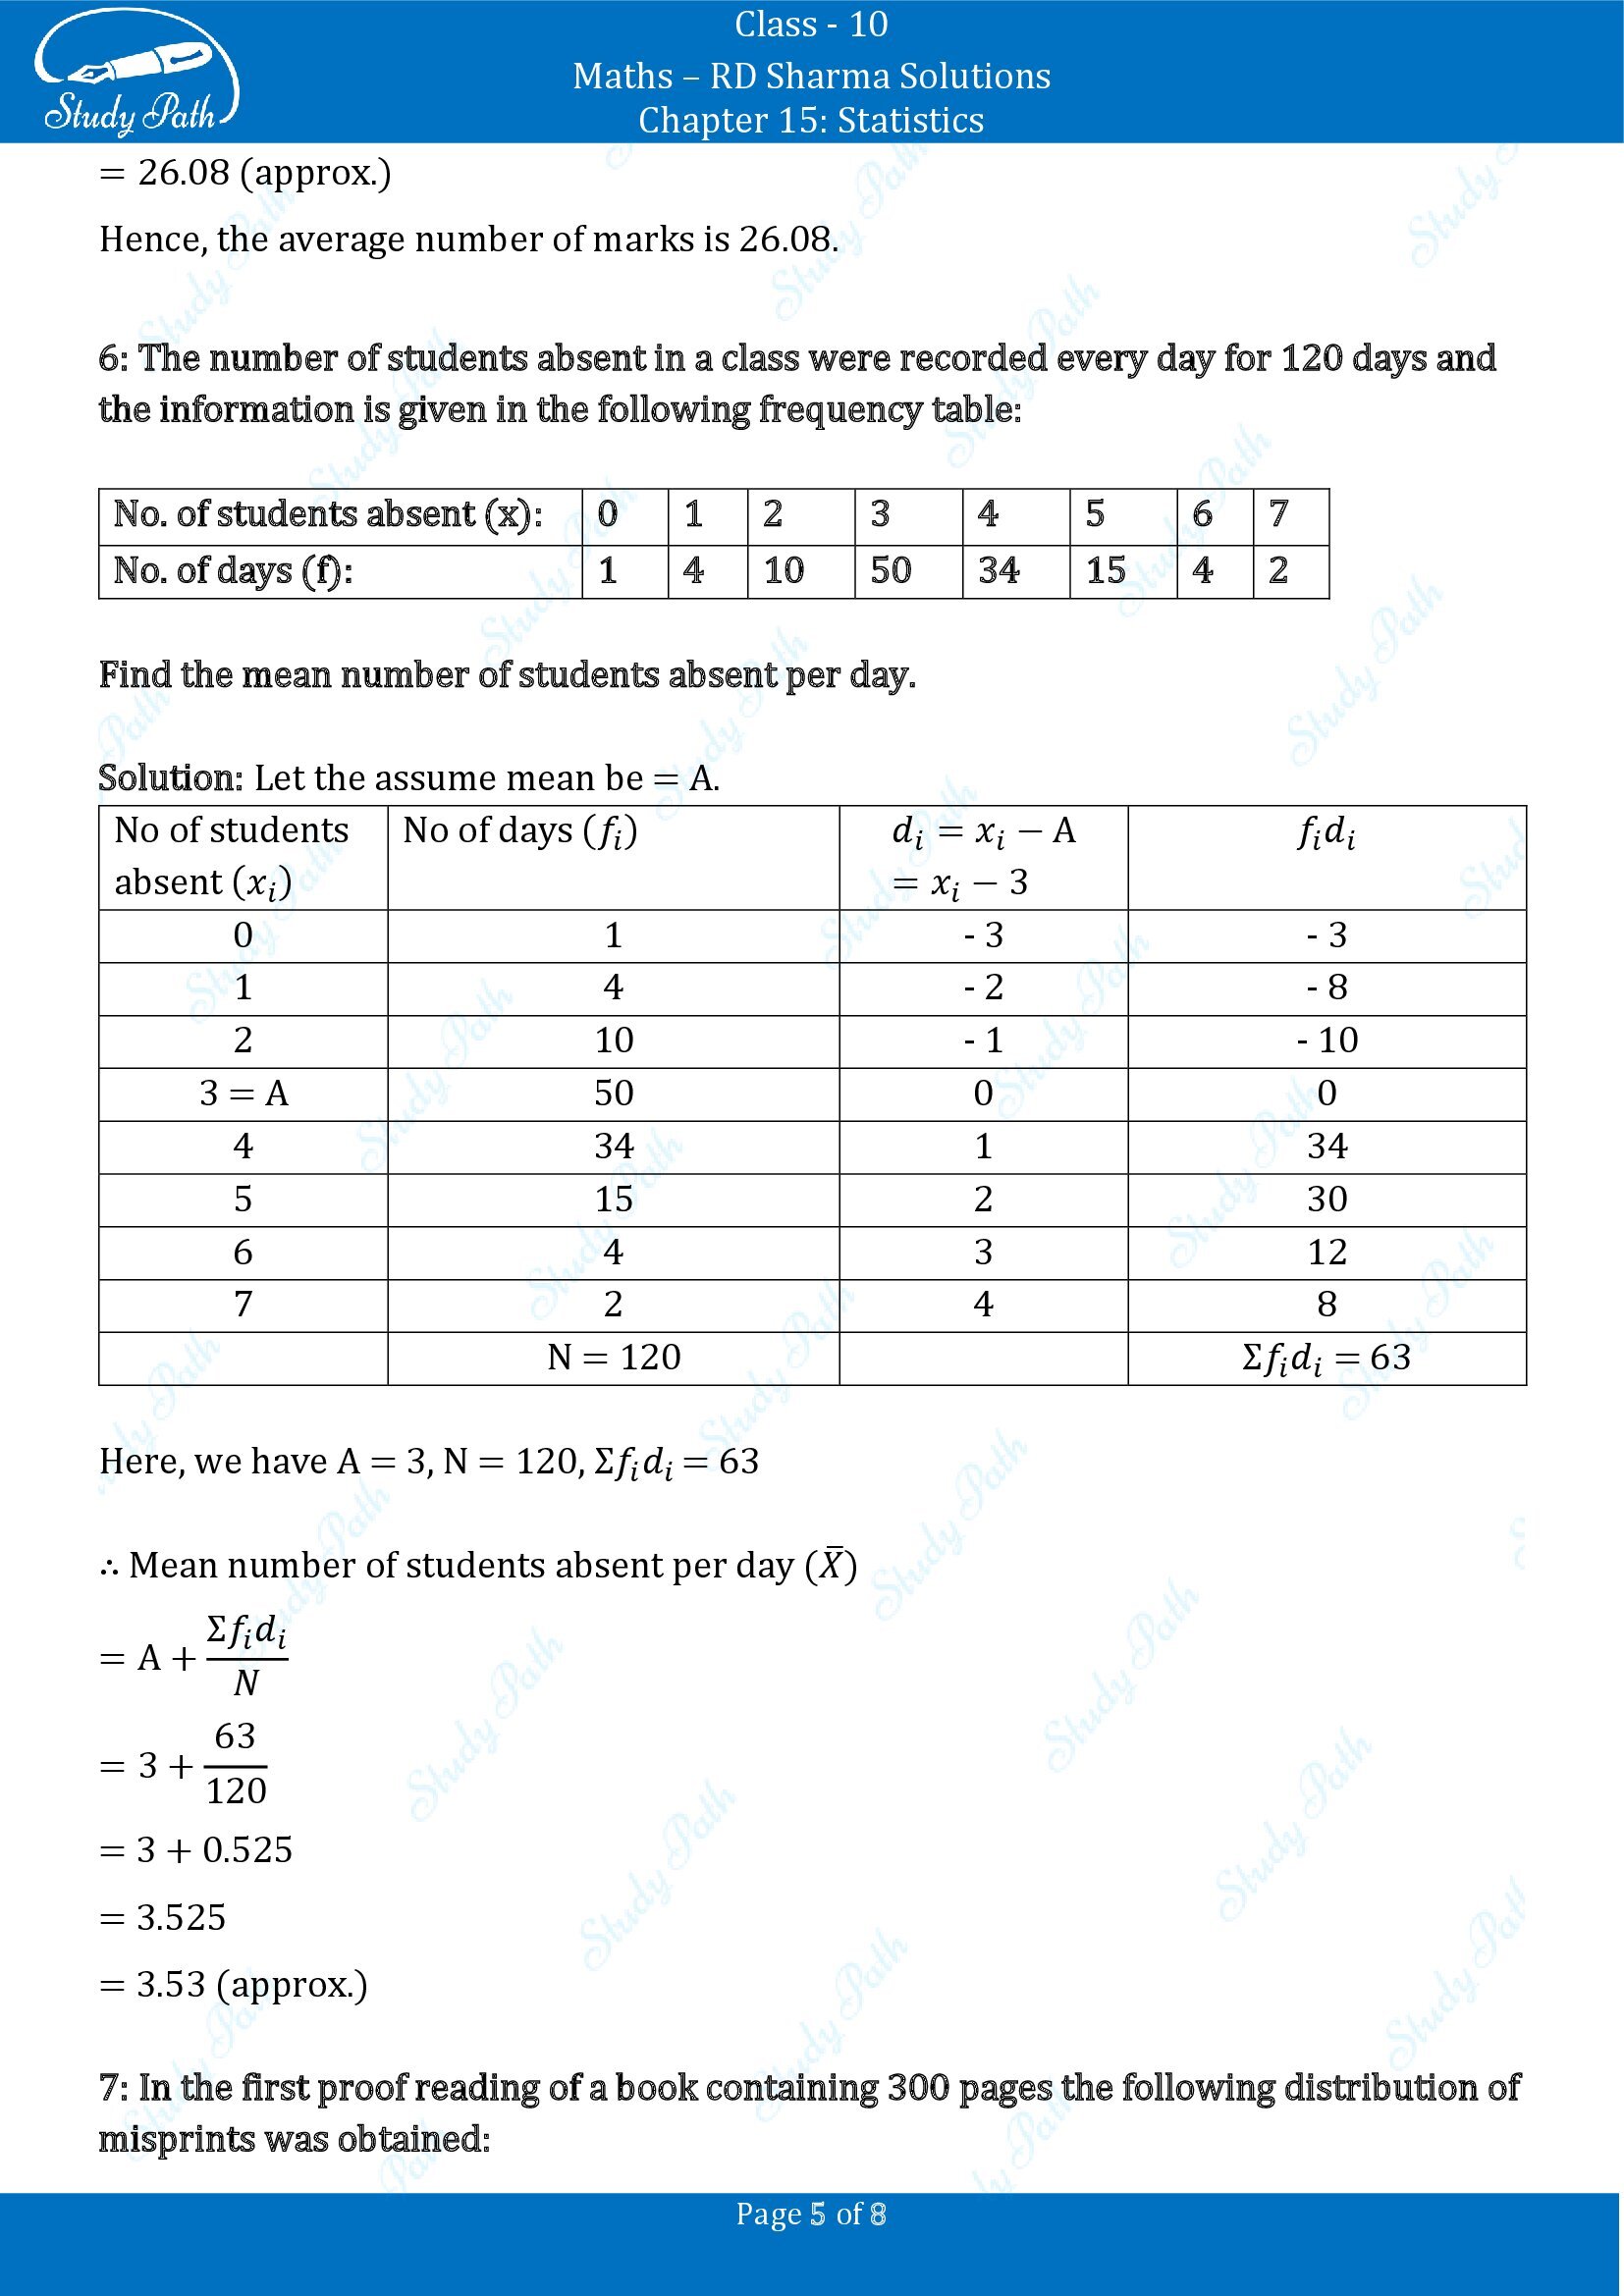 RD Sharma Solutions Class 10 Chapter 15 Statistics Exercise 15.2 00005